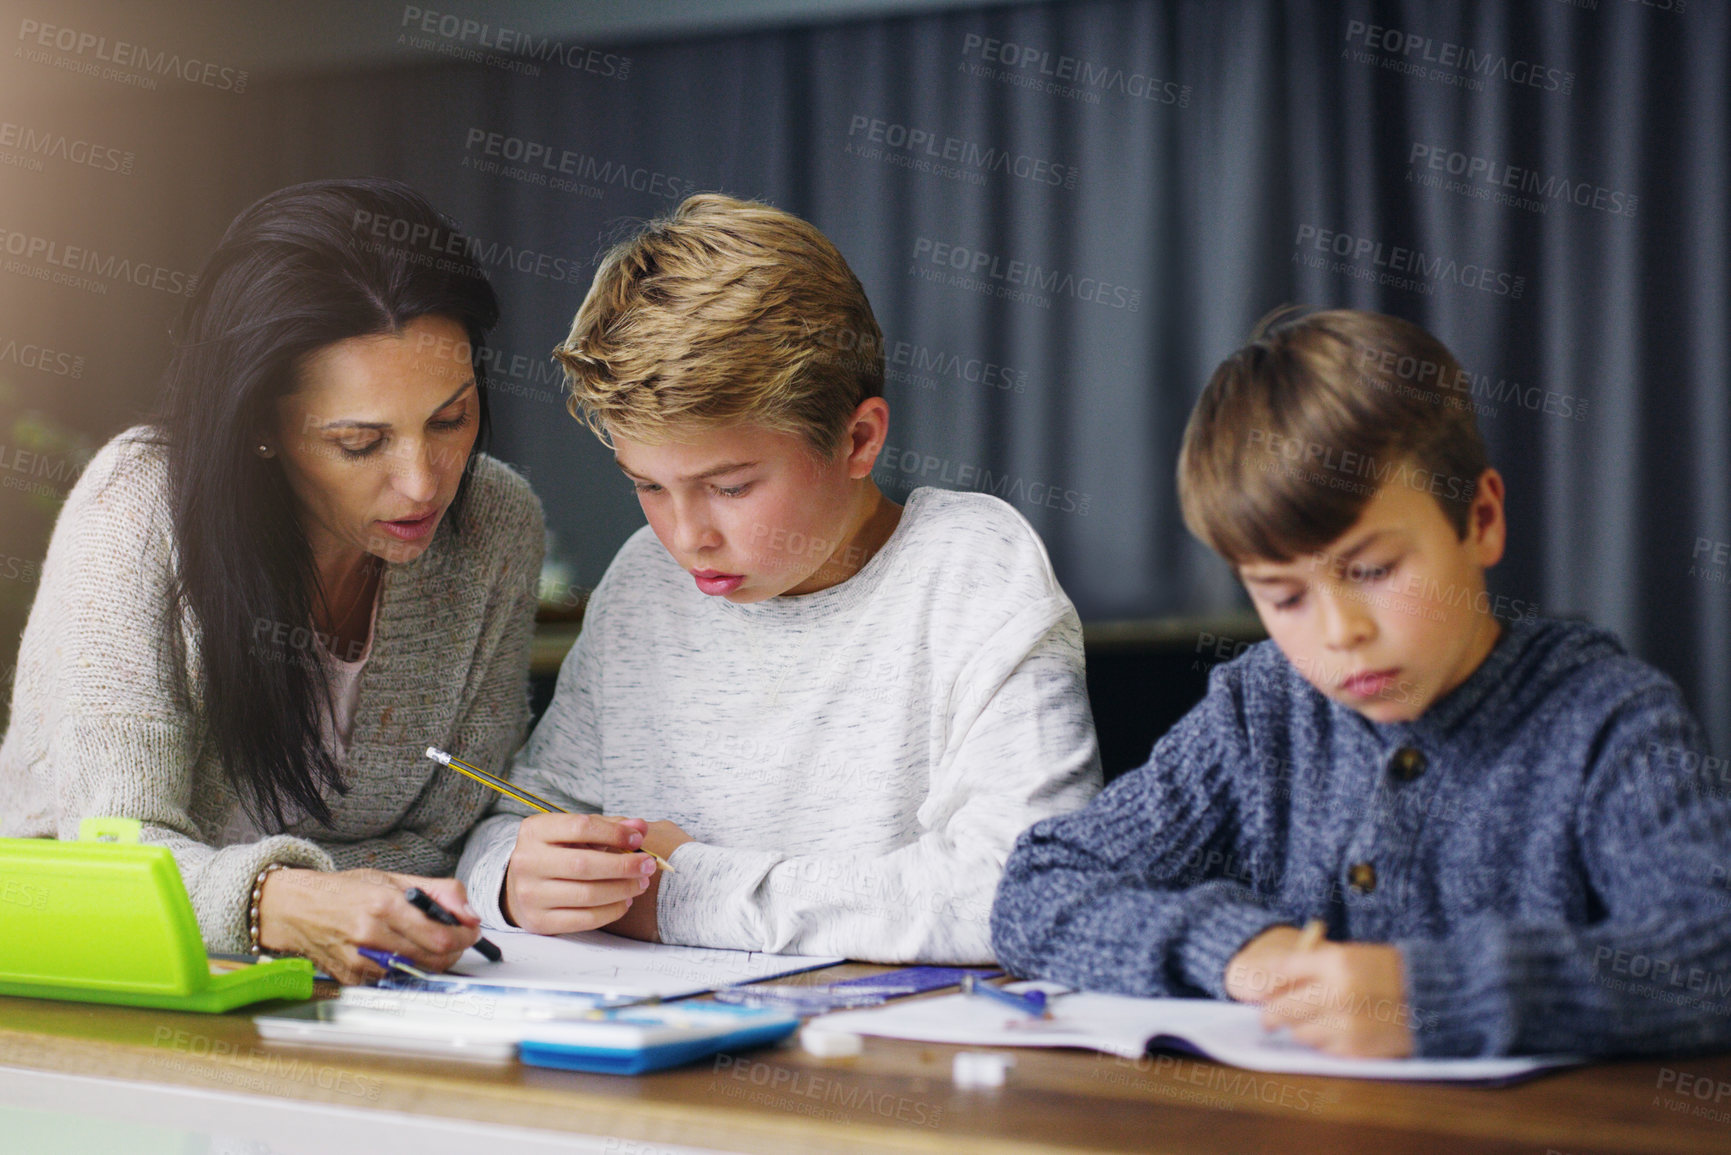 Buy stock photo Shot of a mother helping her sons with their homework